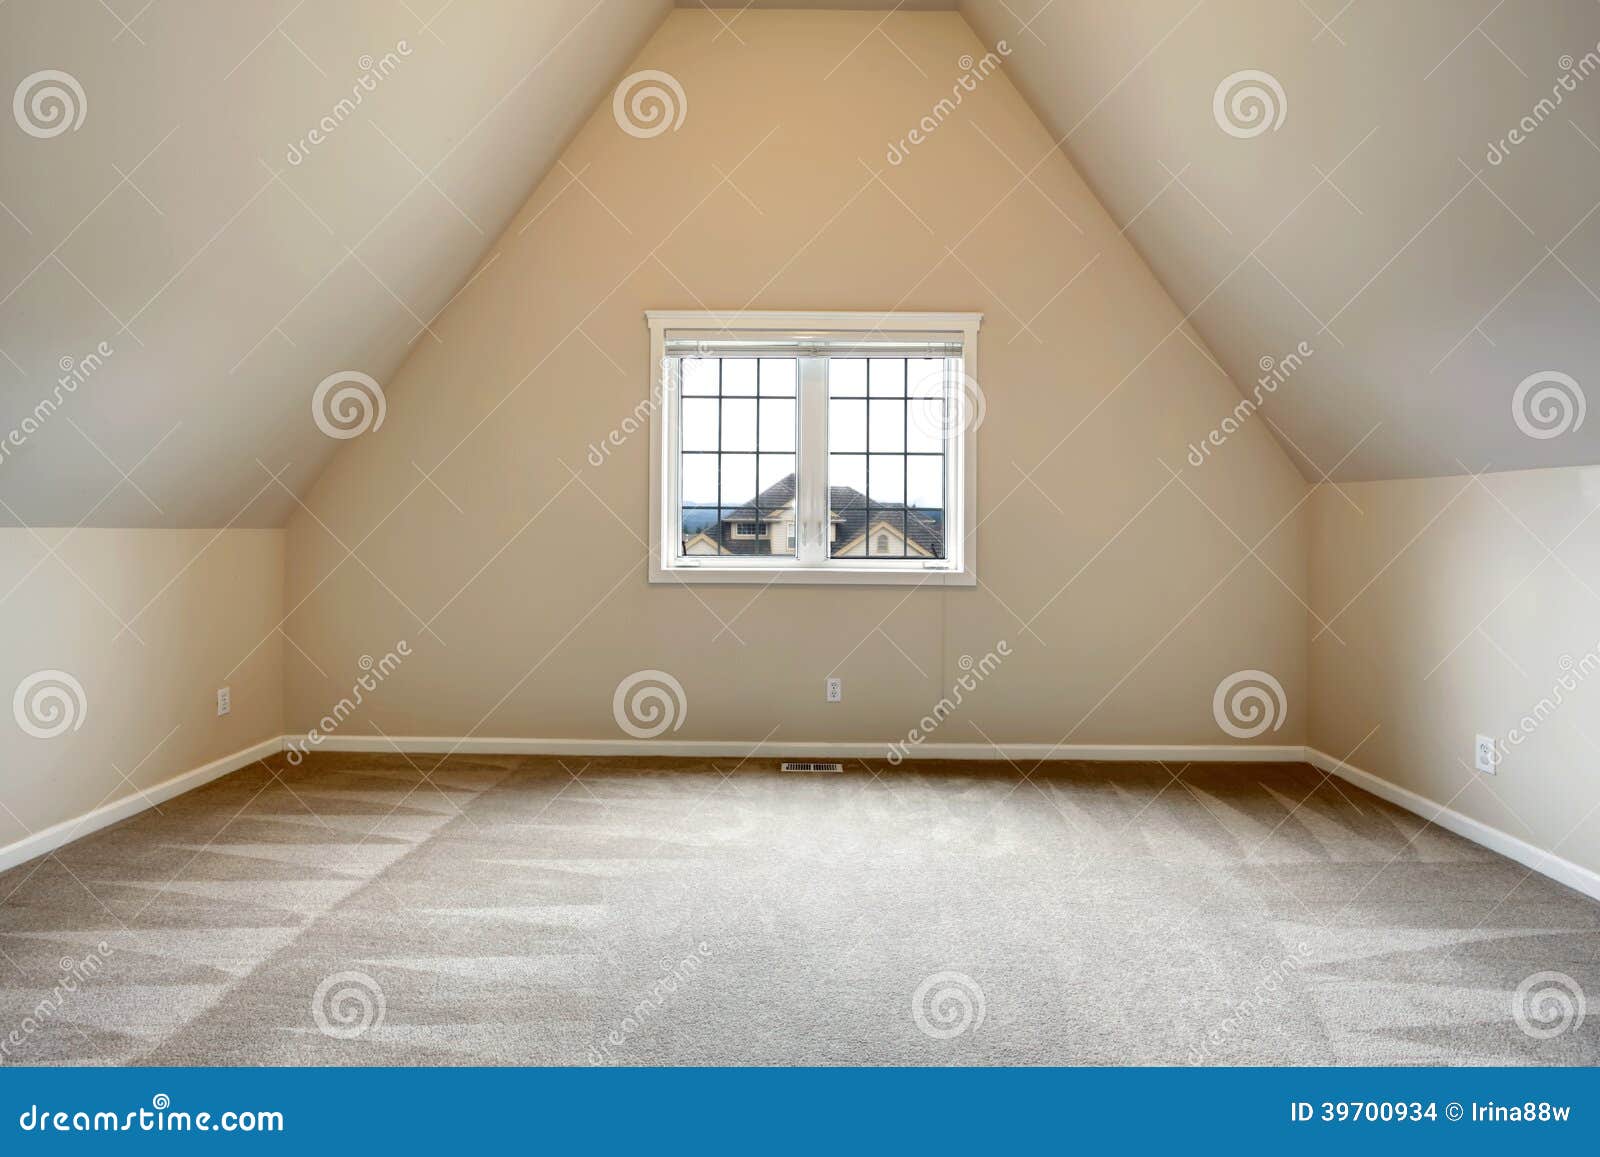 empty room with vaulted ceiling